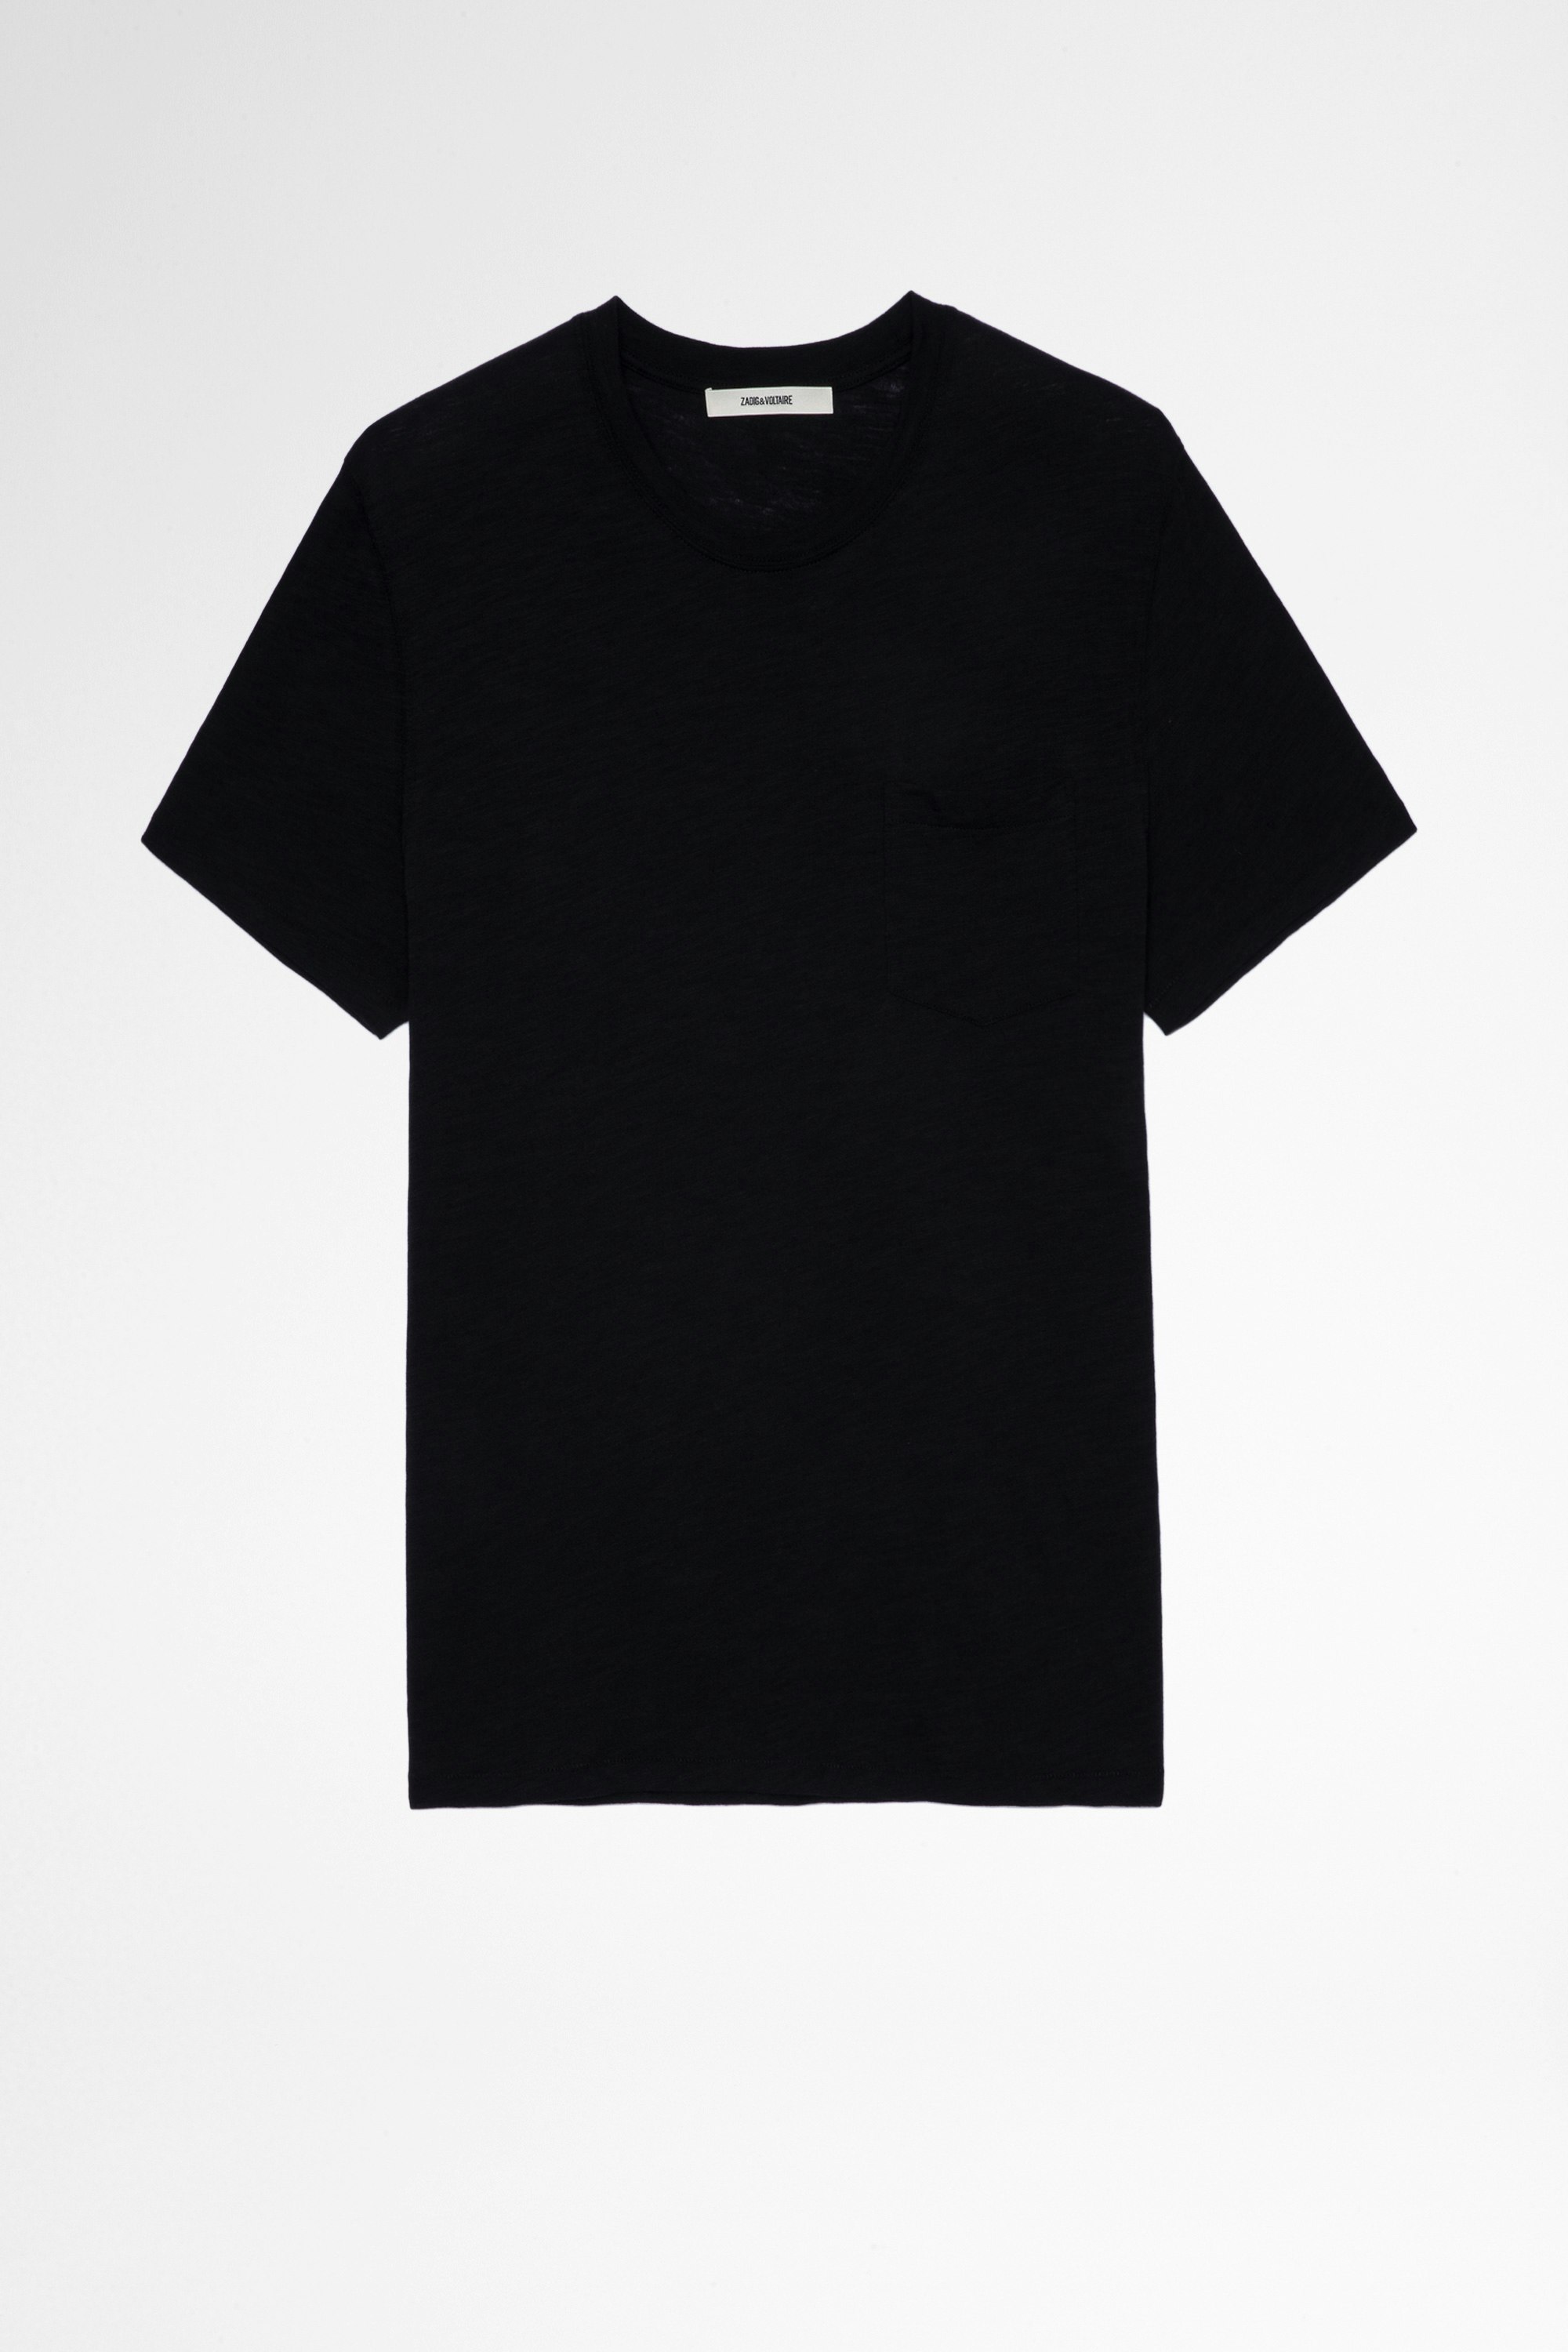 Stockholm T-Shirt Men's black cotton t-shirt with skull applique on the back. Made with fibers from organic farming.